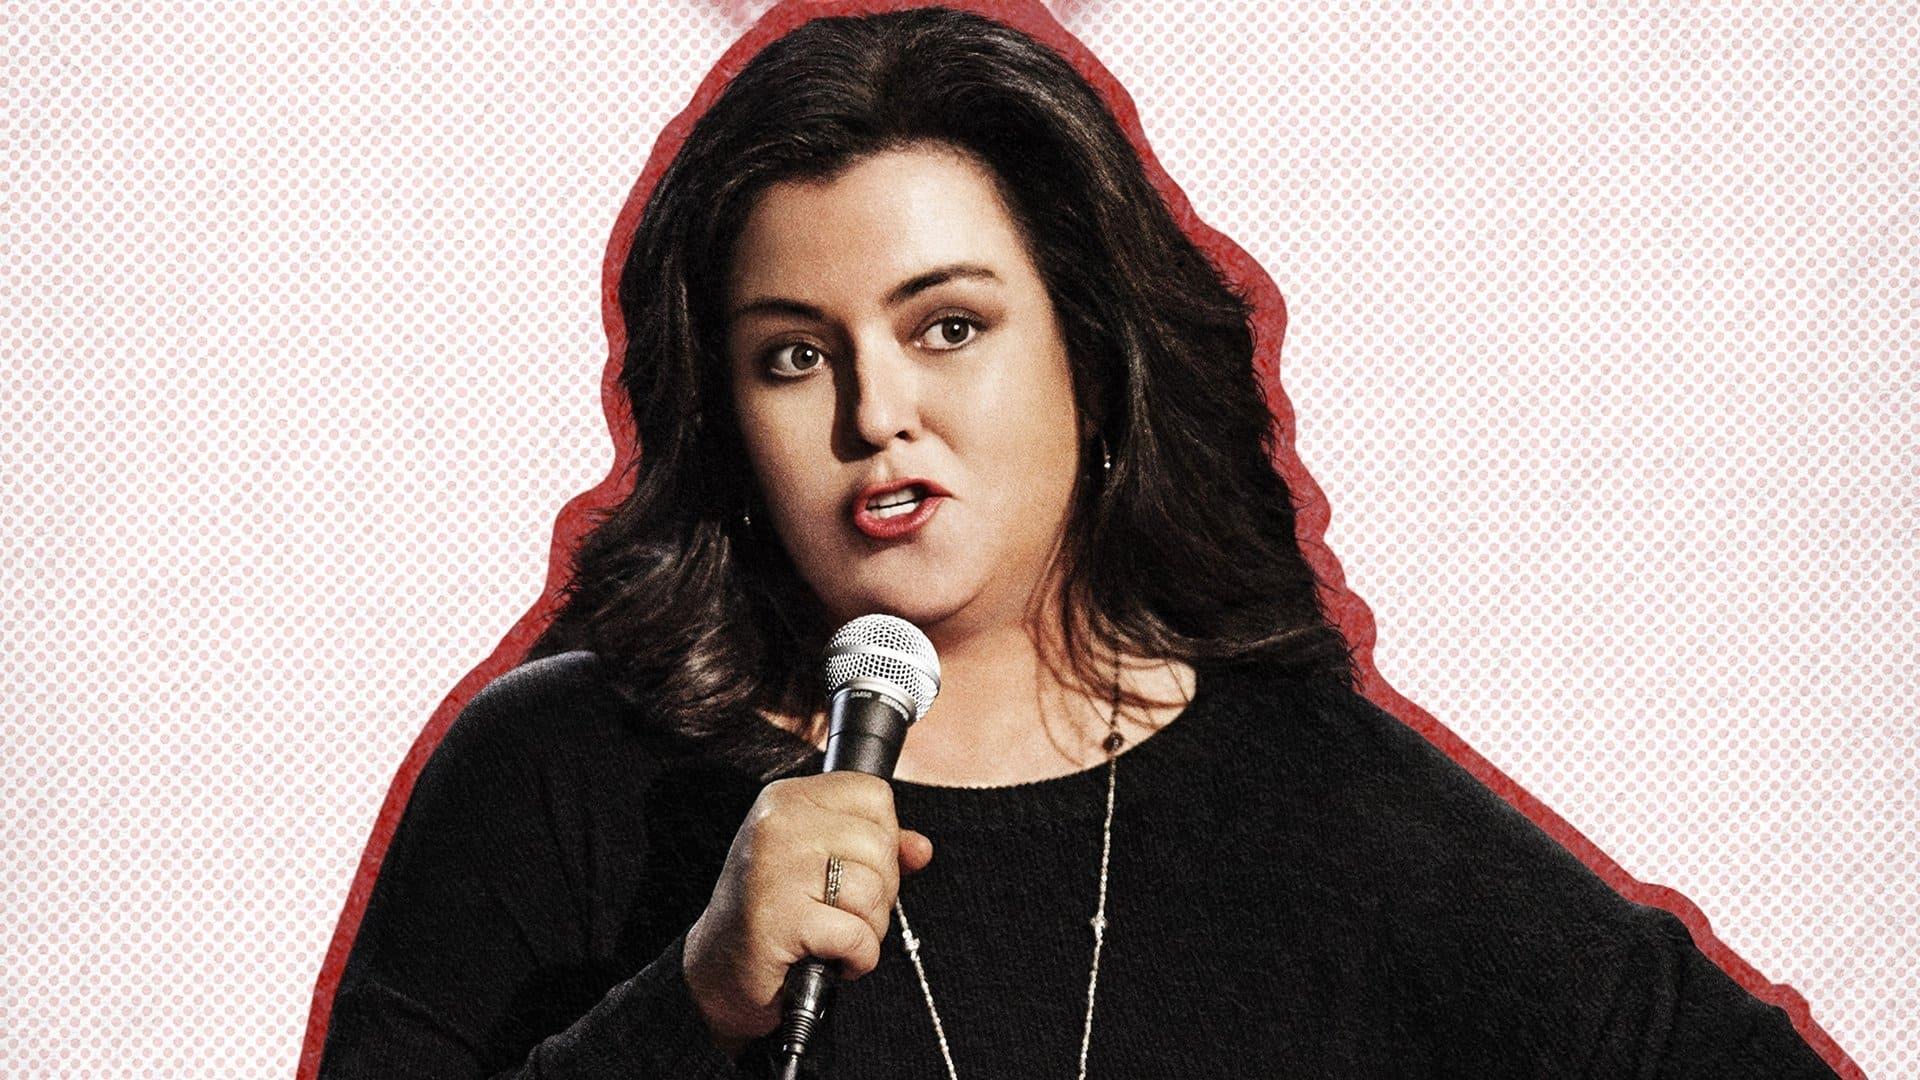 Rosie O'Donnell: A Heartfelt Stand Up backdrop